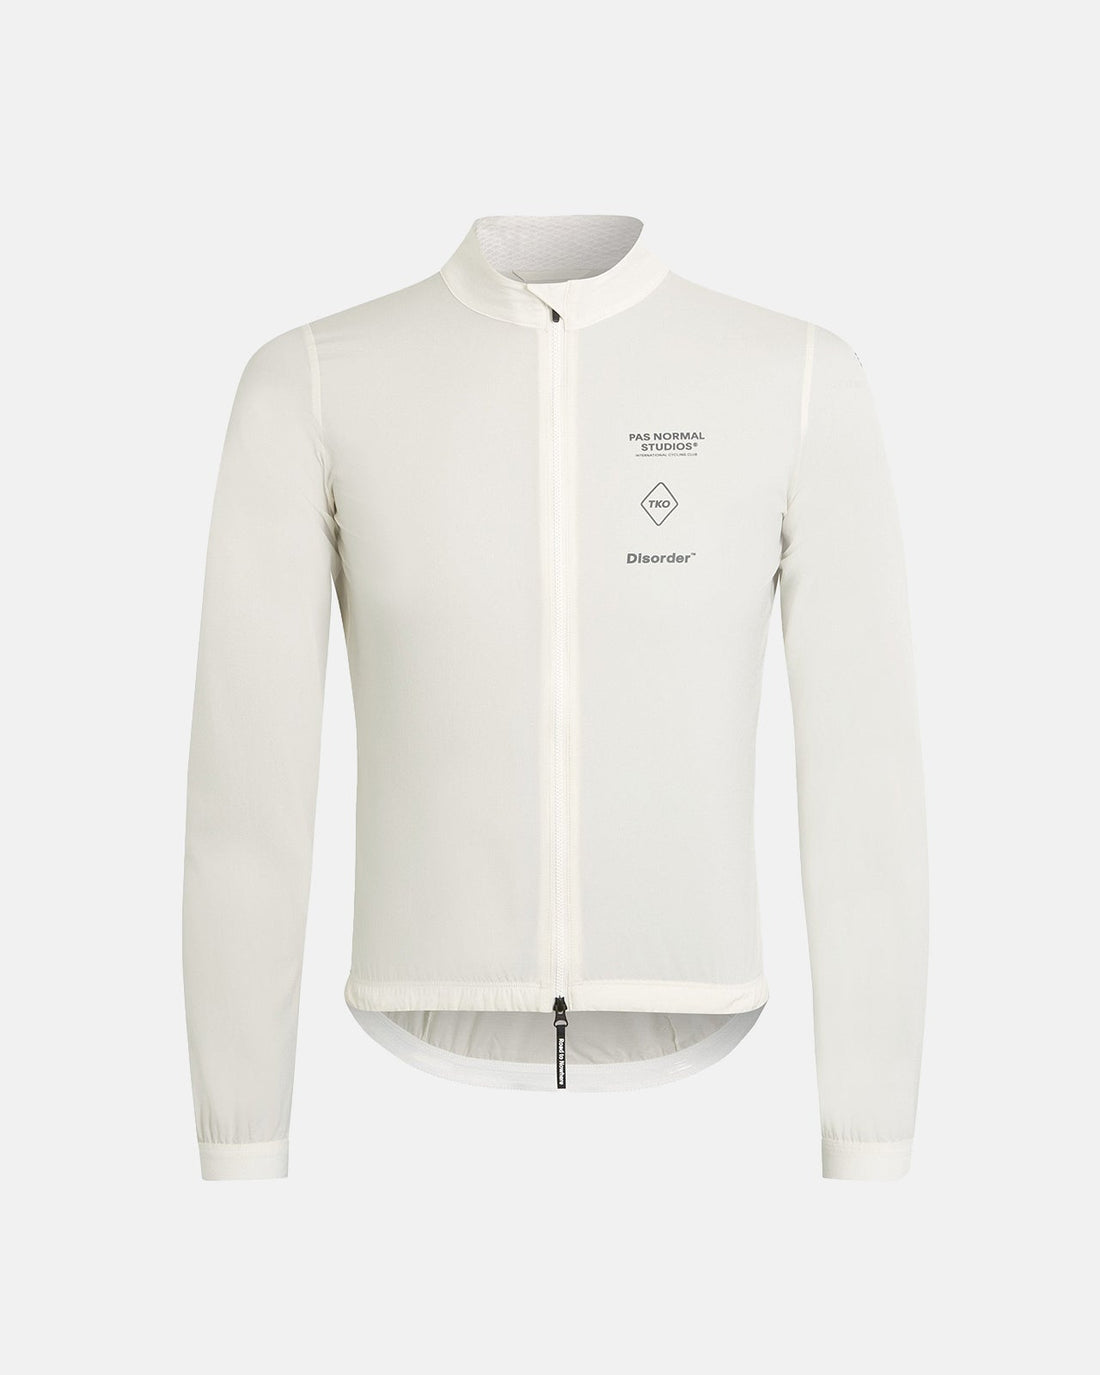 Pas Normal Studios T.K.O Mechanism Stow Away Jacket - Off White